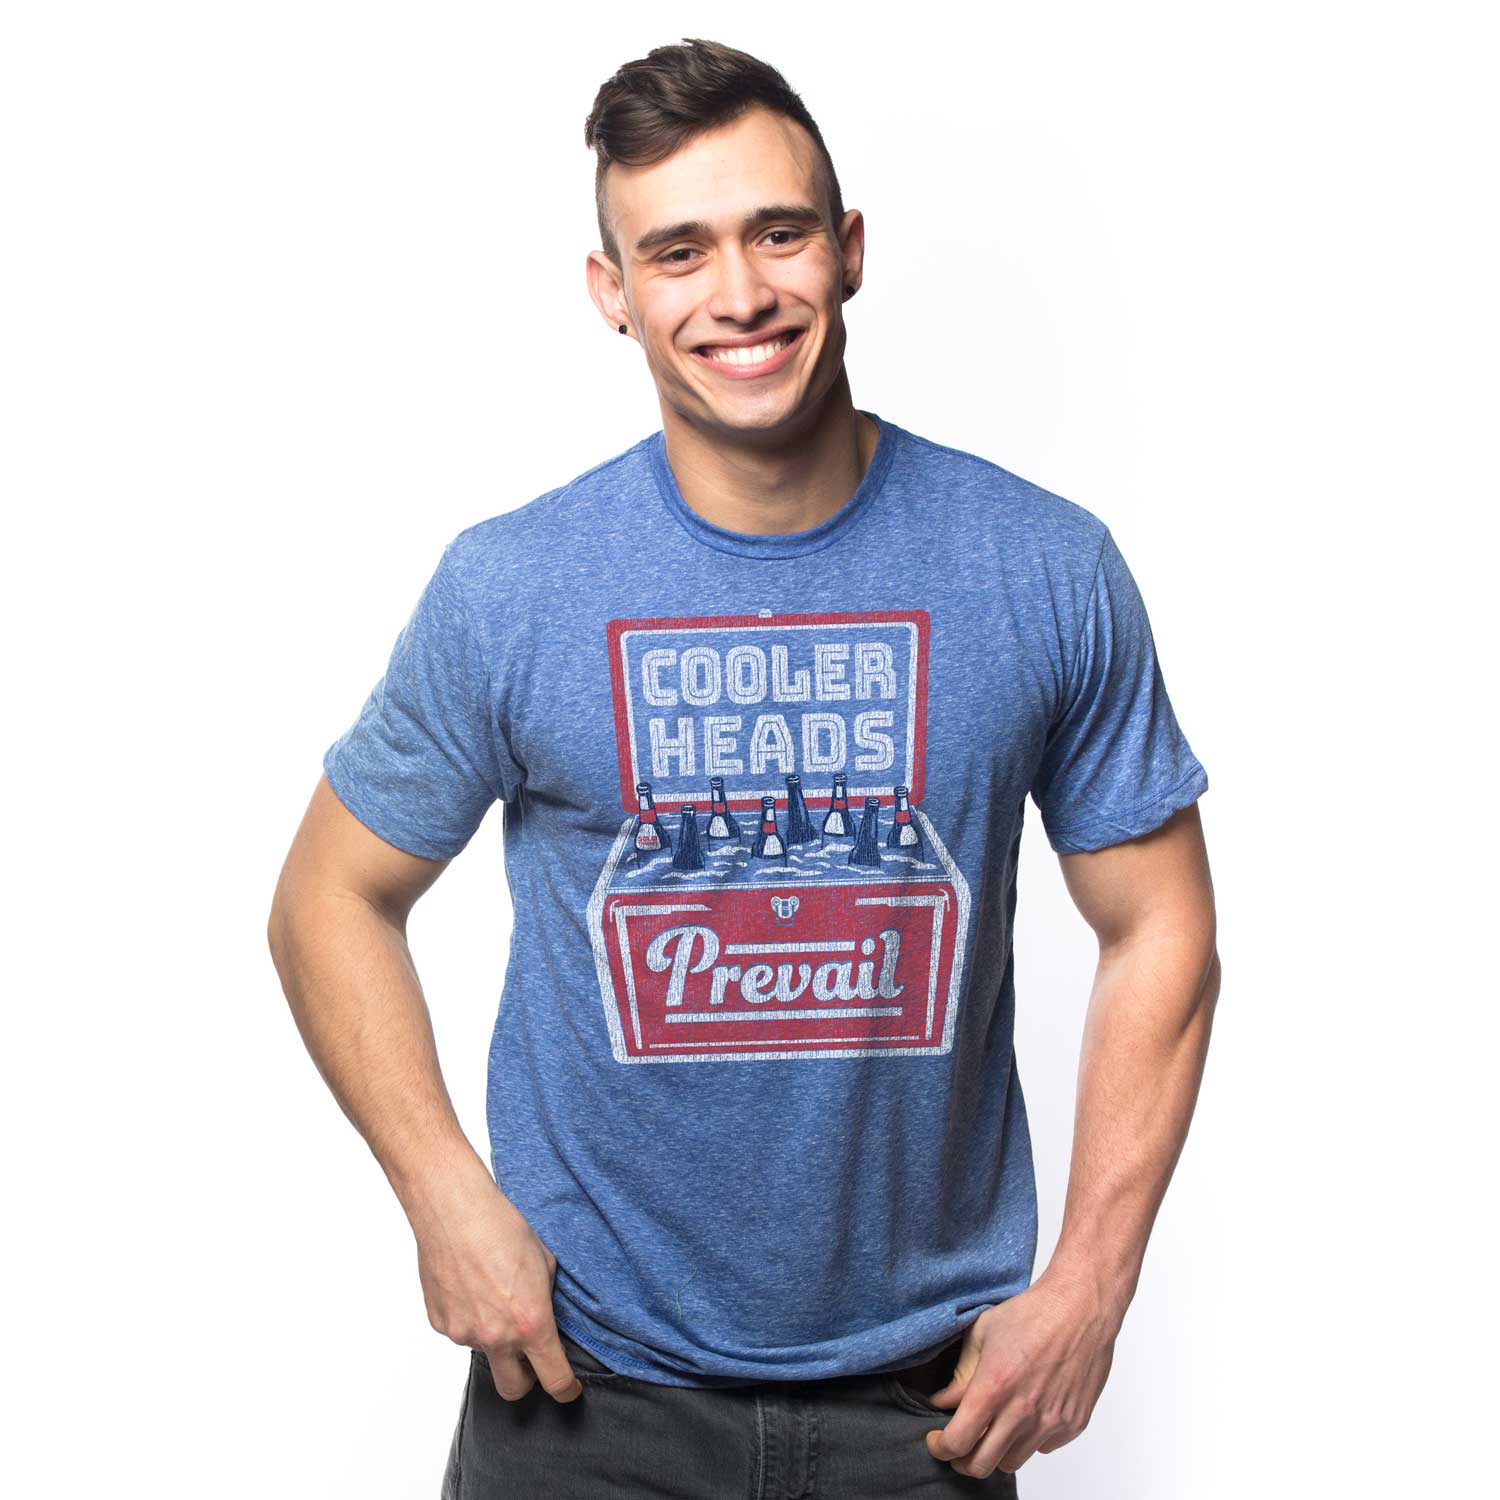 Men's Cooler Heads Prevail Vintage Graphic Tee | Retro Summer Drinking T-shirt | Solid Threads